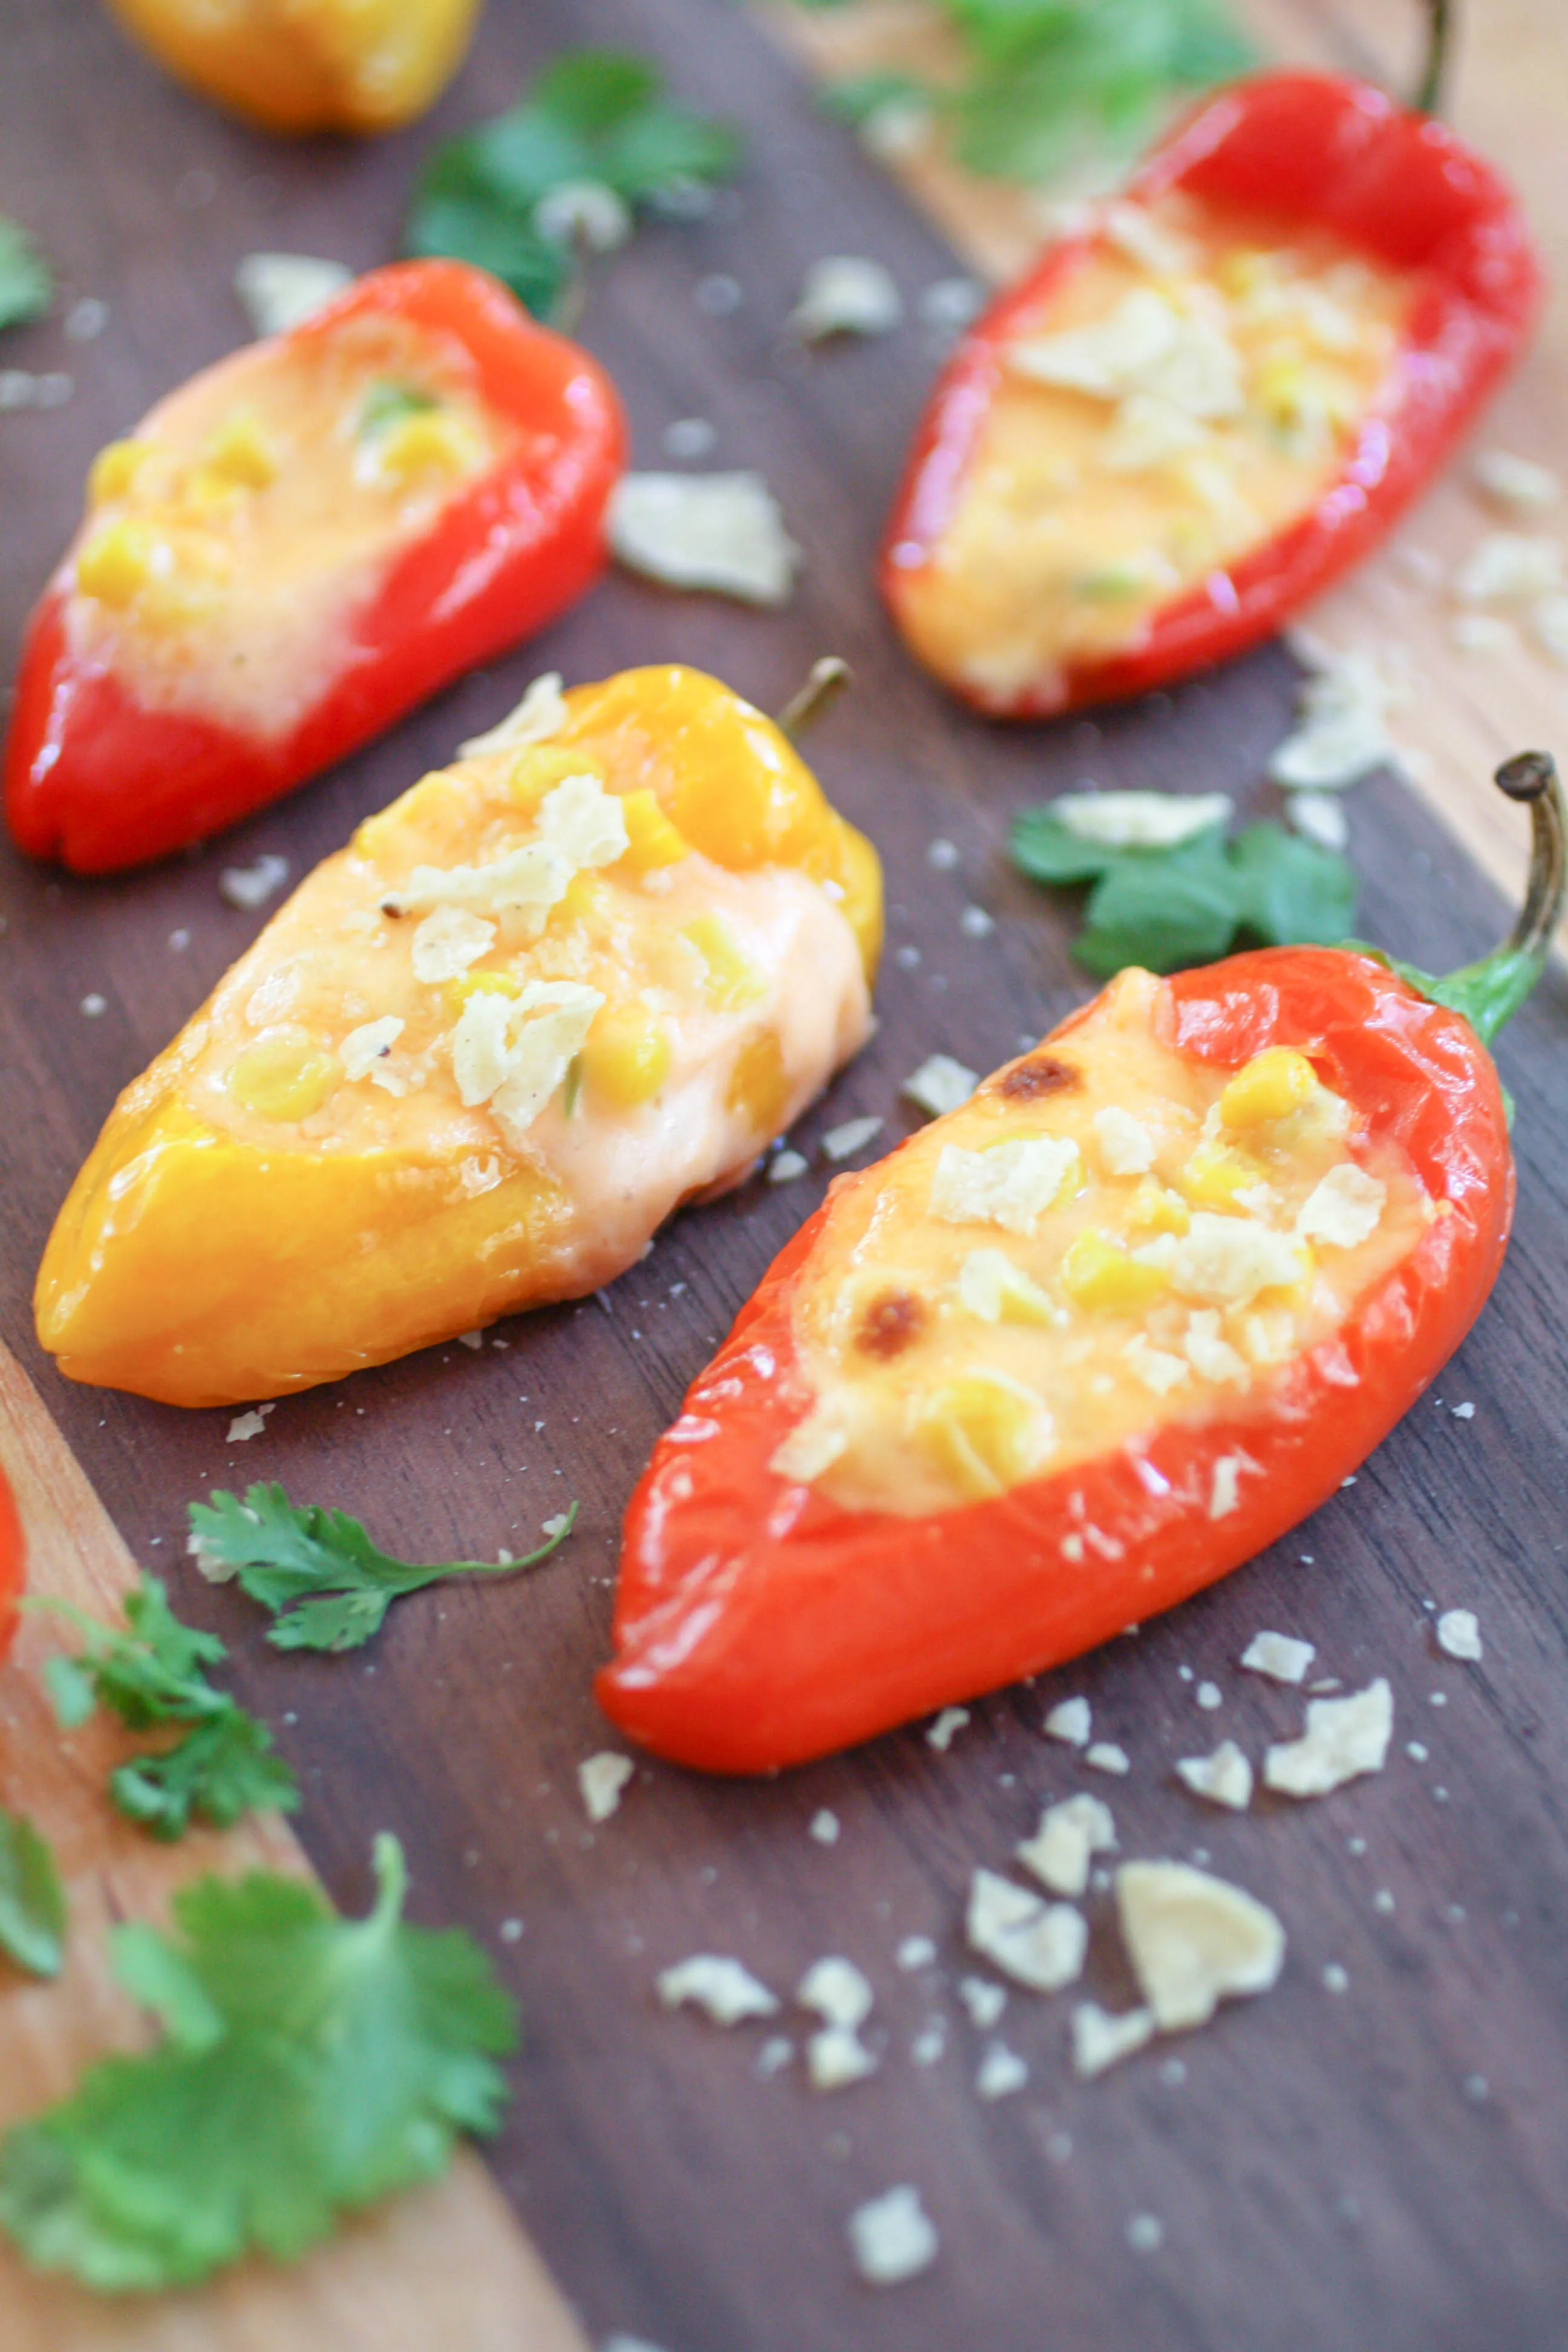 Cheesy Jalapeño & Corn Stuffed Sweet Pepper Poppers are a fun appetizer for sure. Cheesy Jalapeño & Corn Stuffed Sweet Pepper Poppers are great for parties and gatherings!